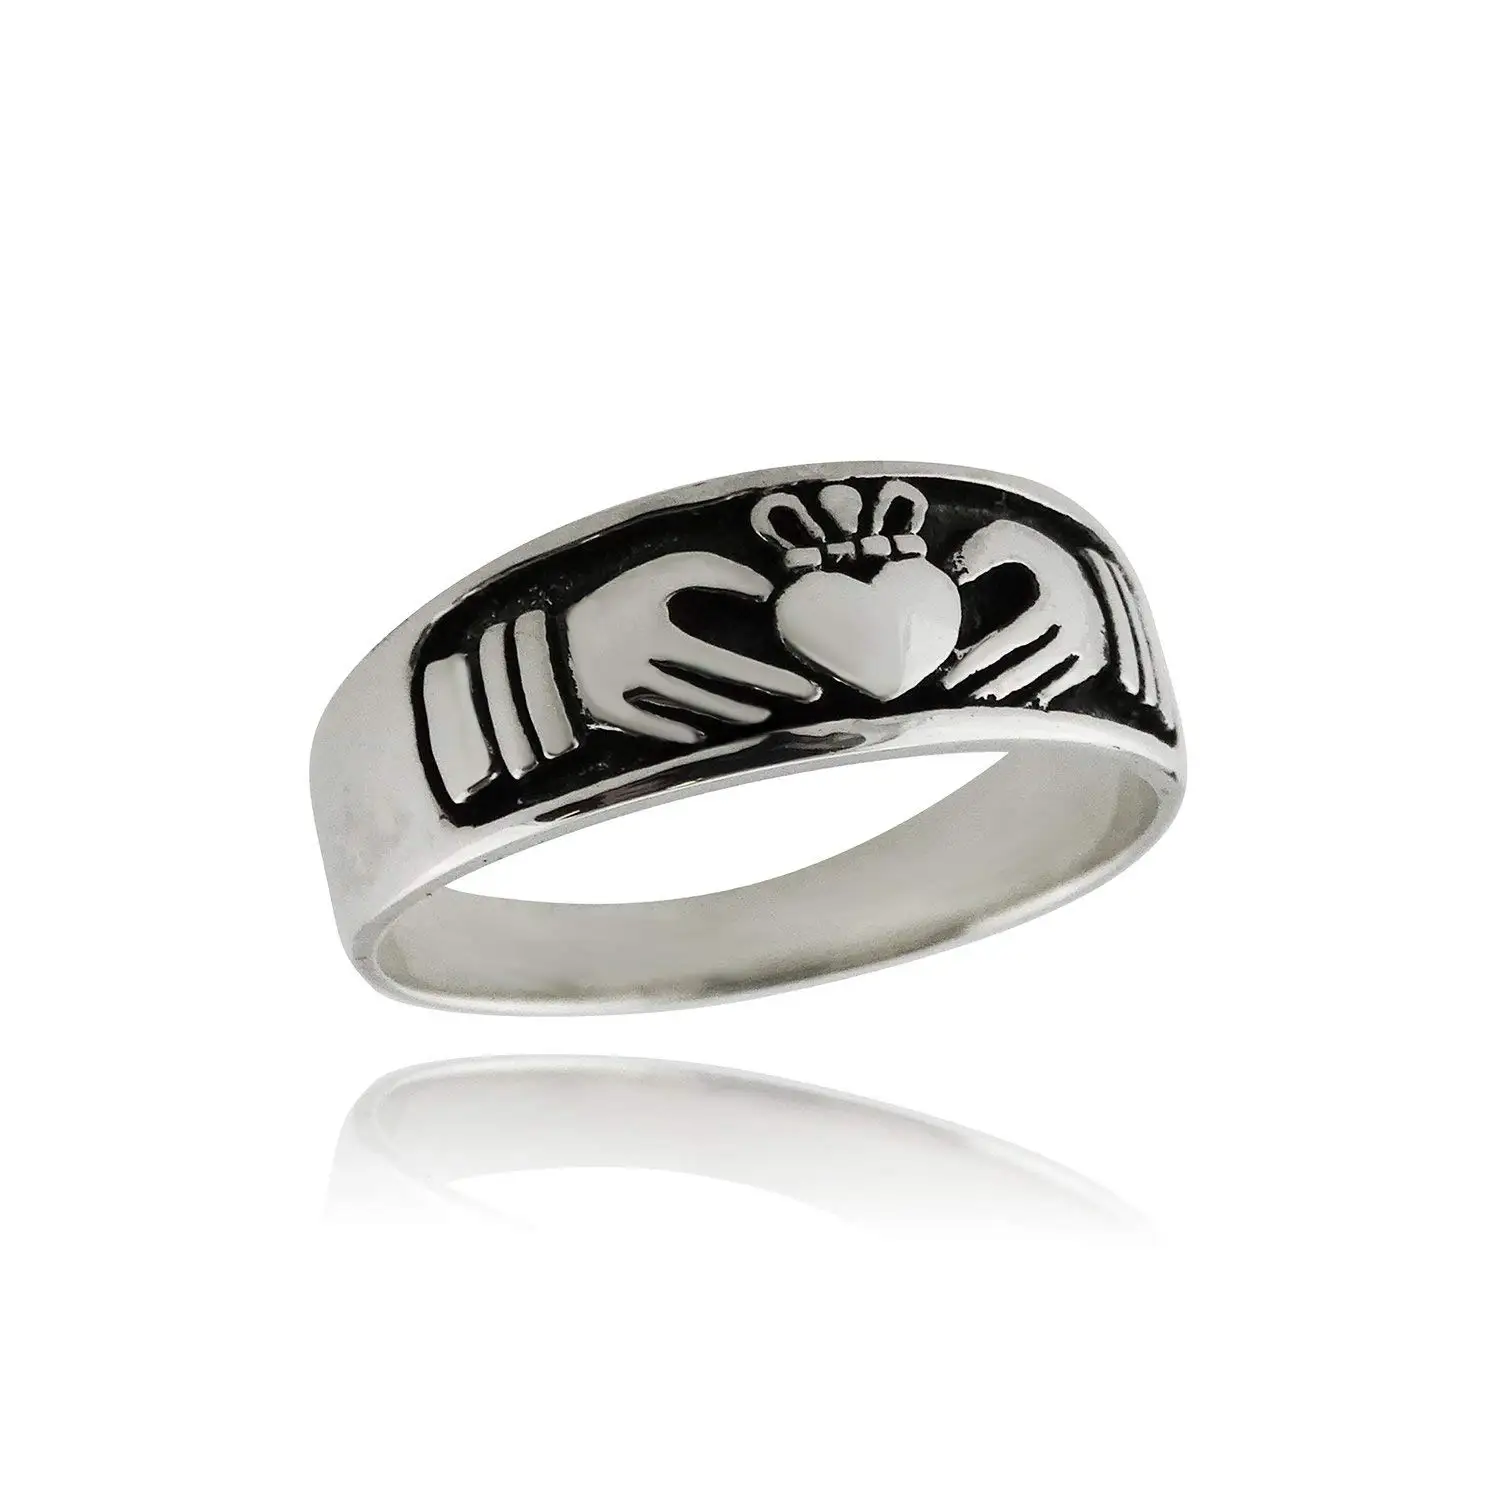 Cheap Claddagh Band Ring Find Claddagh Band Ring Deals On Line At